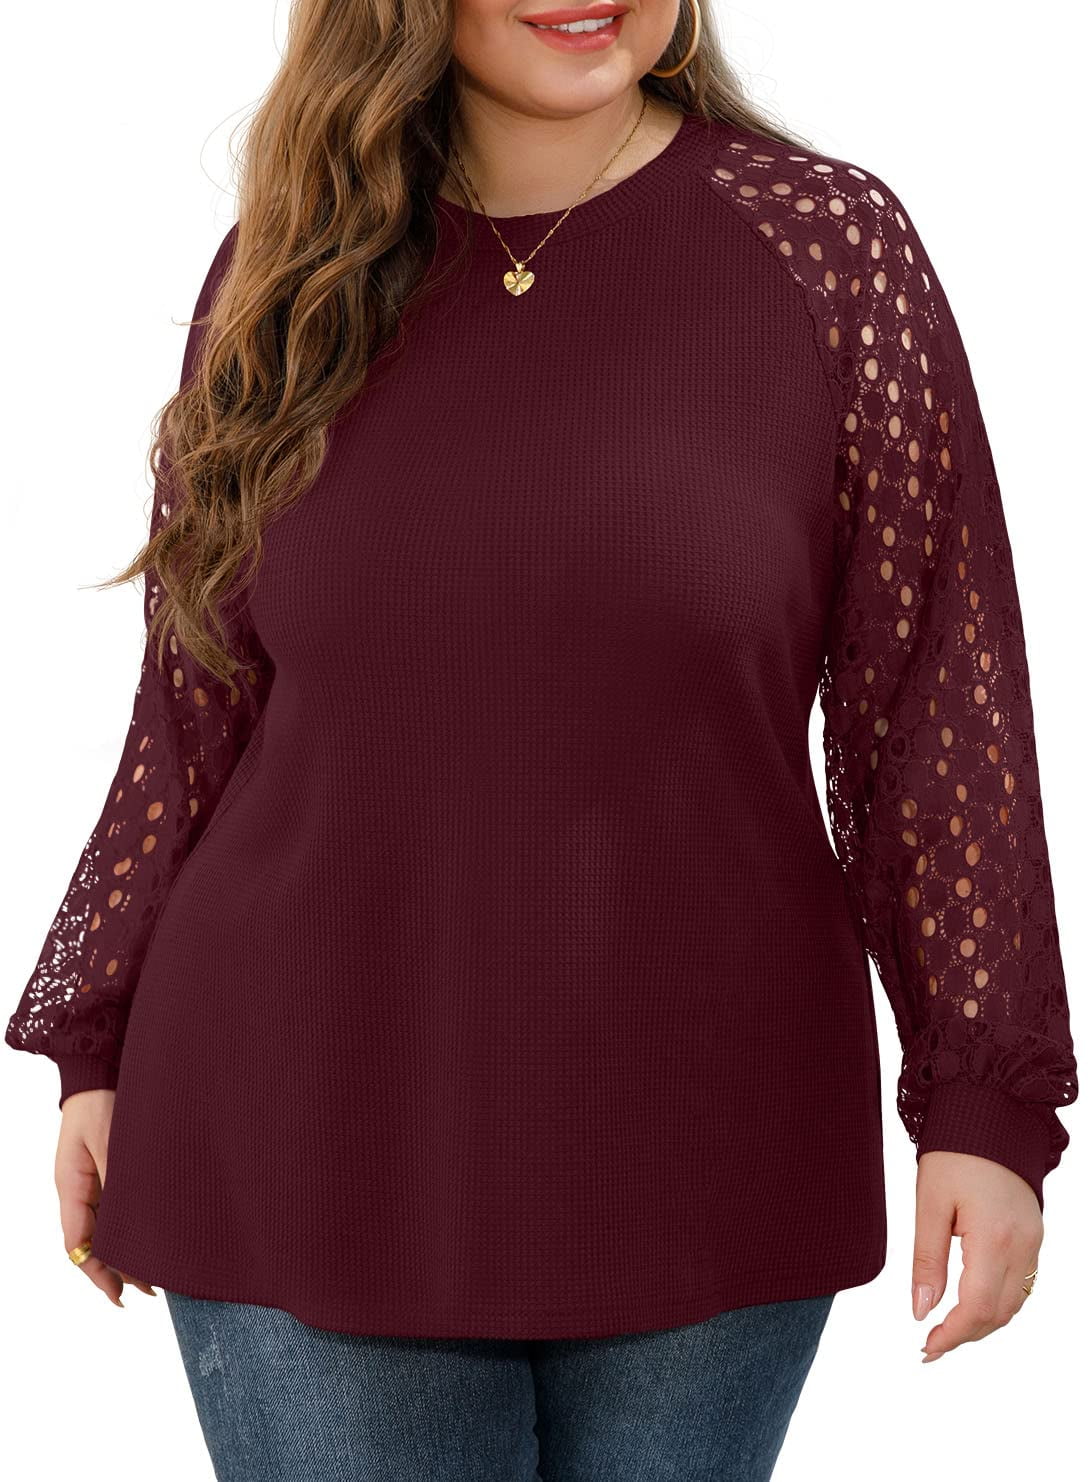 JWD Plus Size Tops For Women Lace Sleeve Blouse Palestine